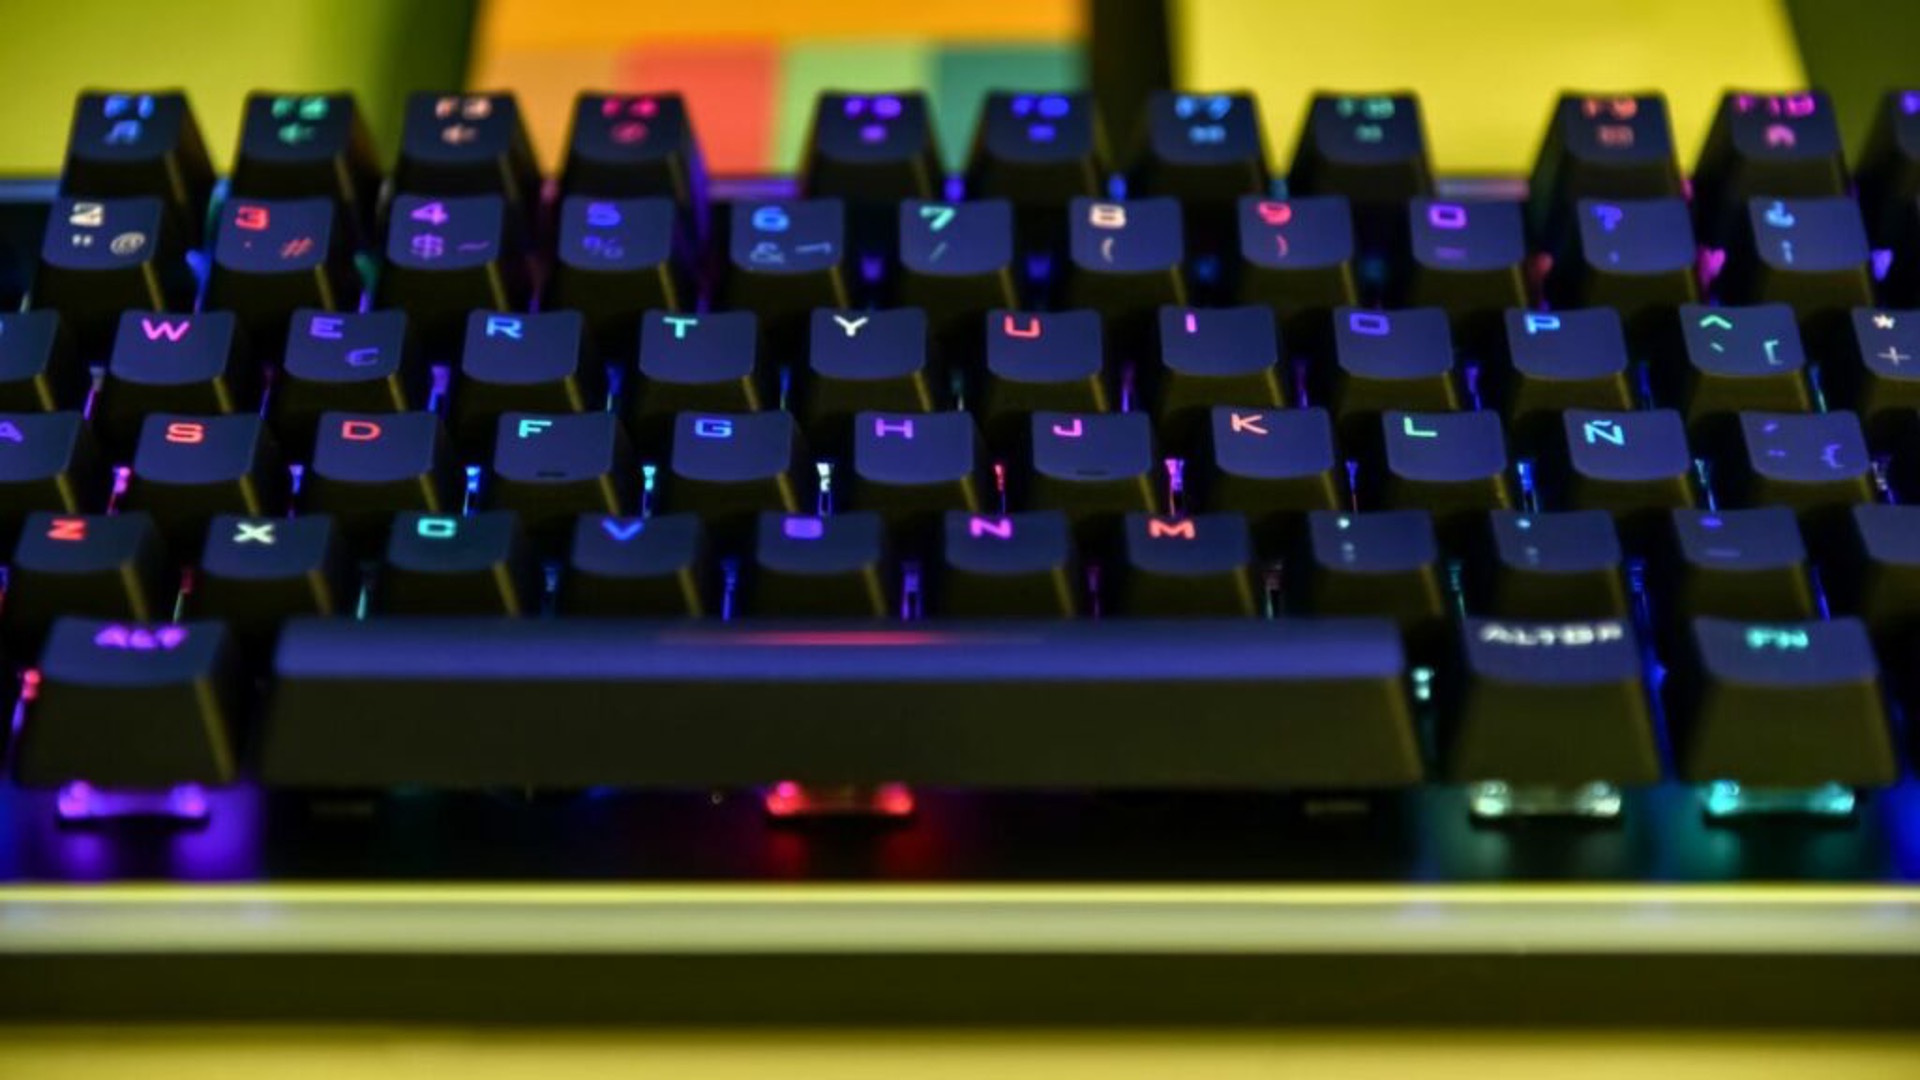 AULA Gaming Keyboard 94518: How To Change Color